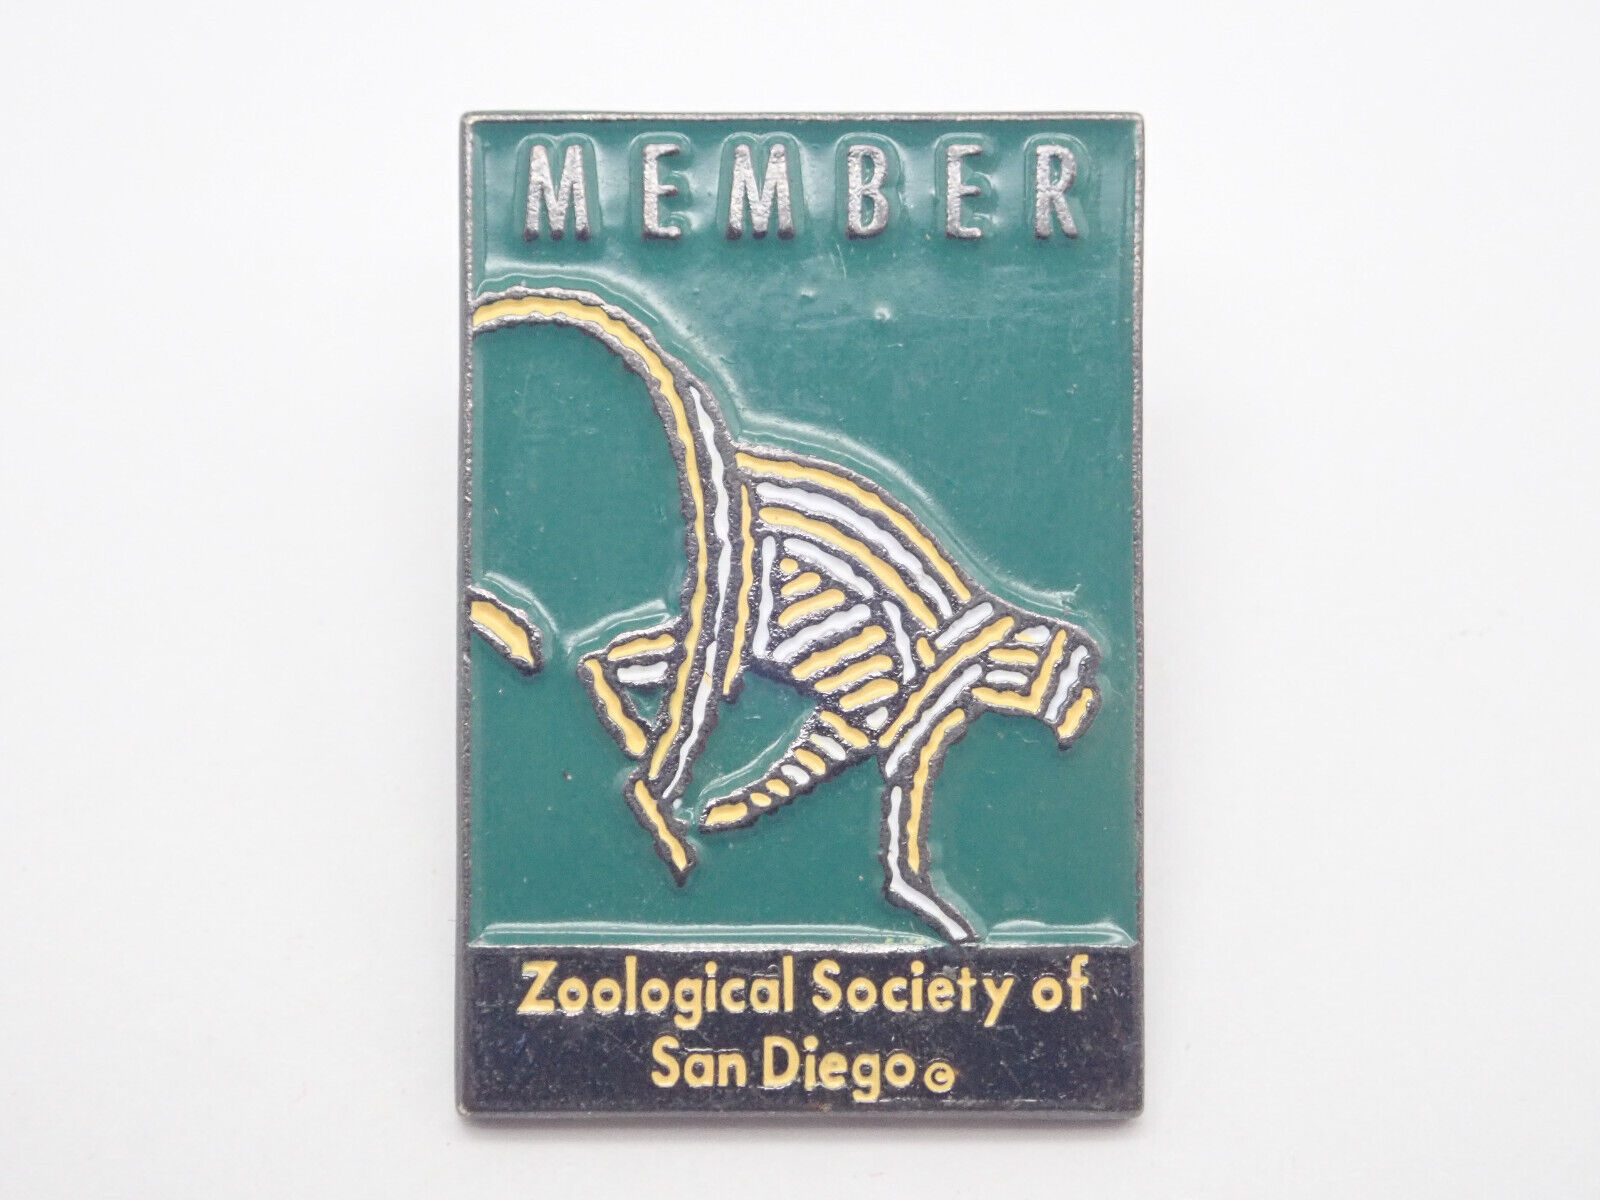 Zoological Society of San Diego Member Monkey Vintage Lapel Pin